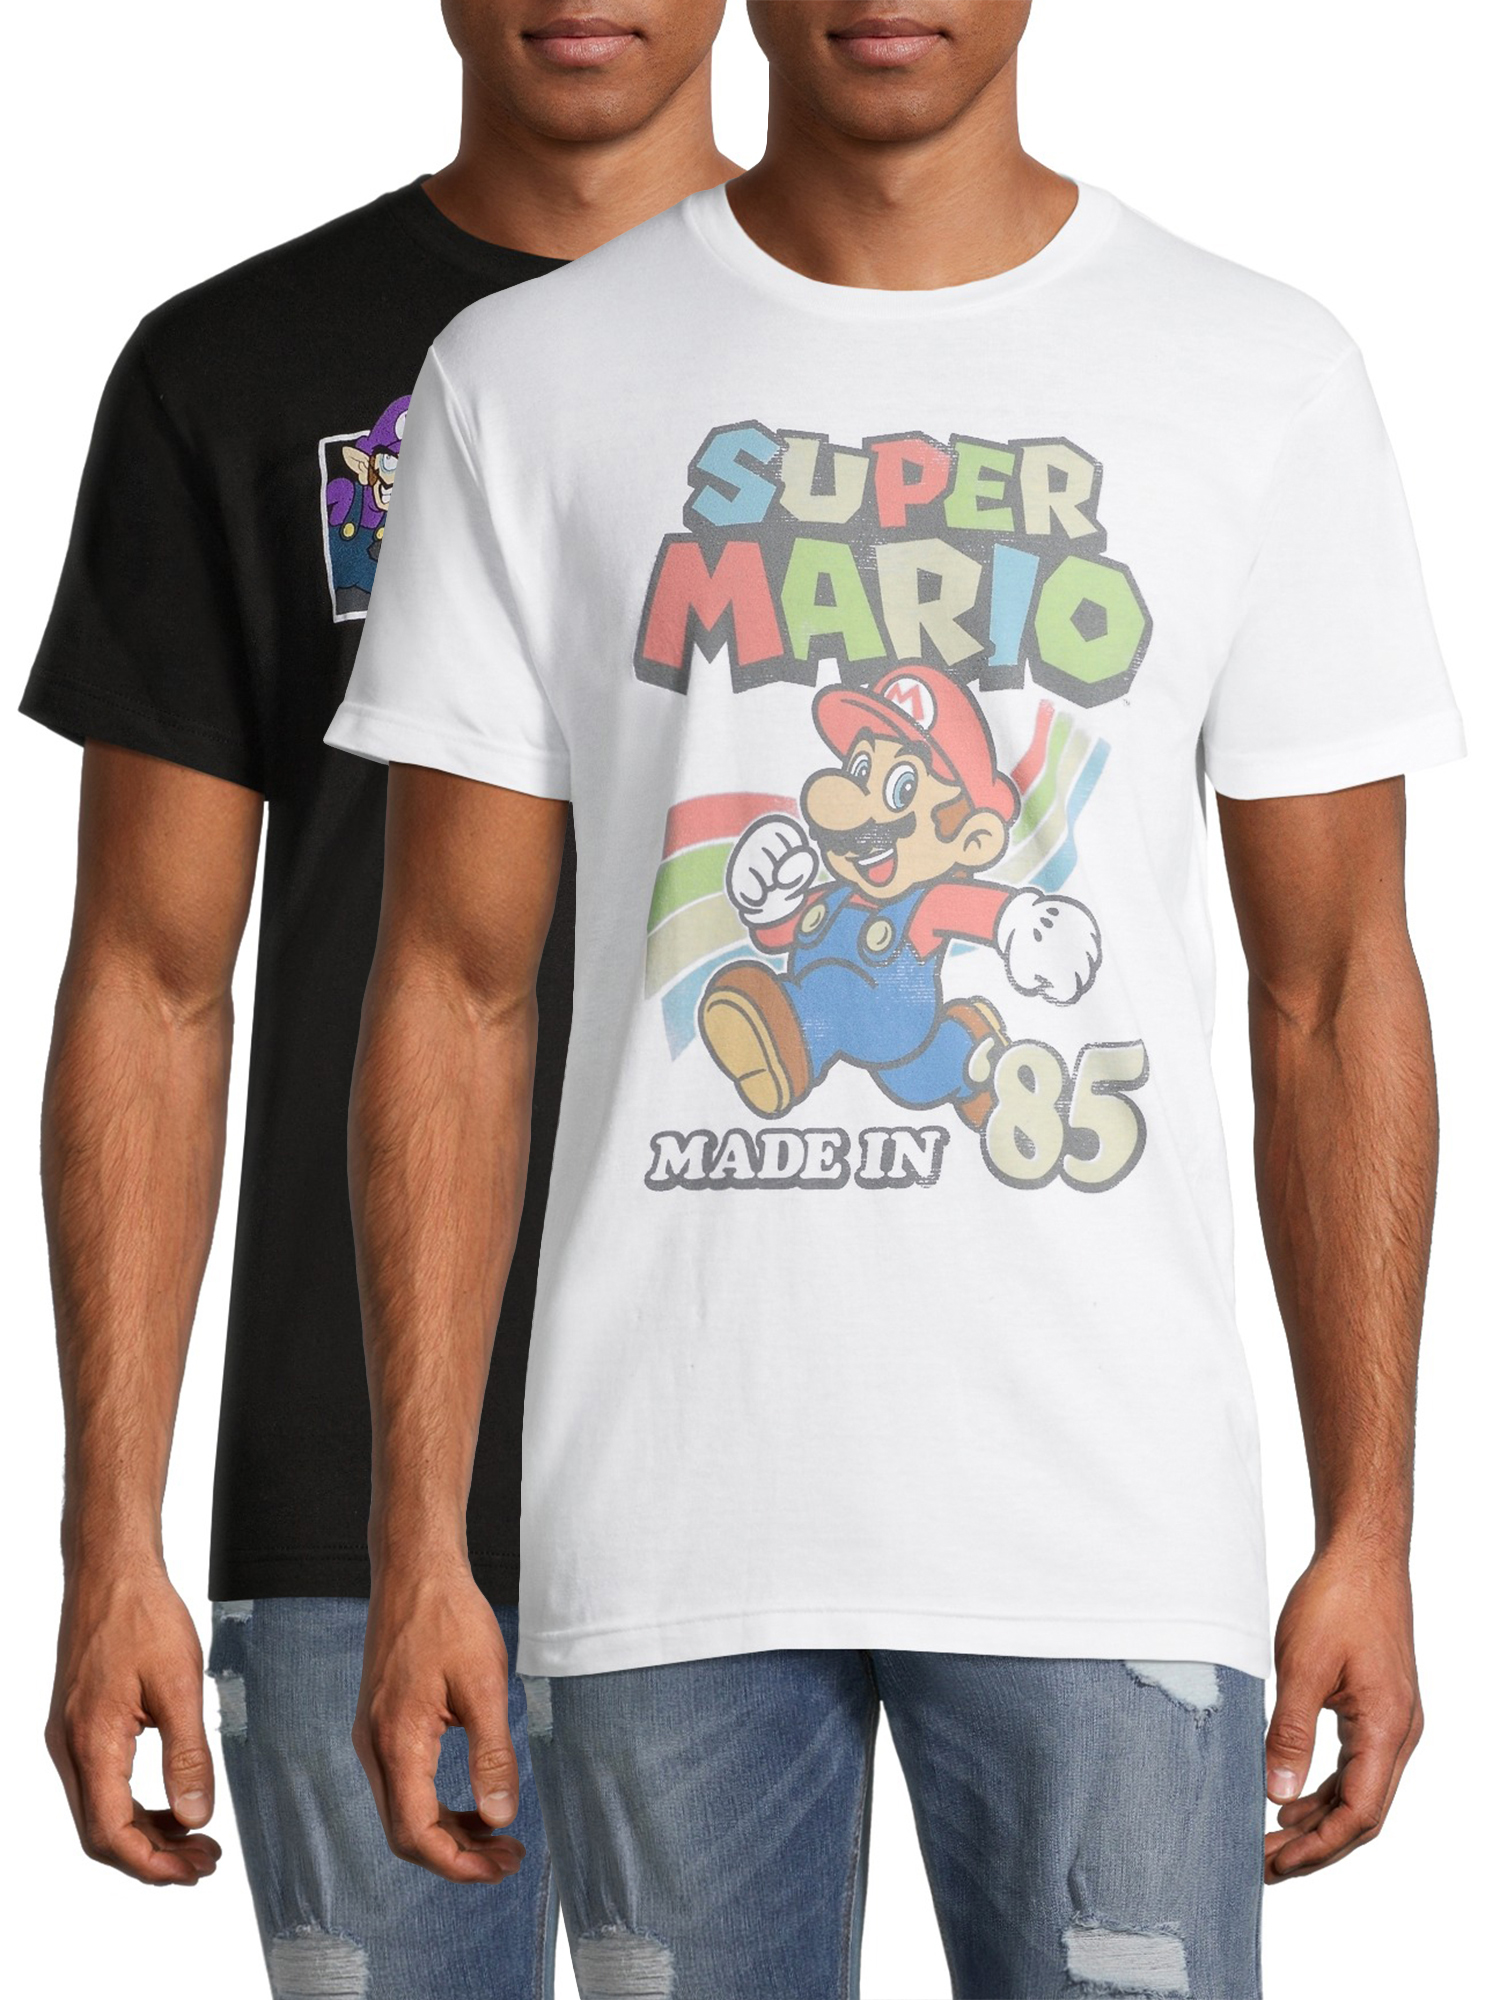 Nintendo Super Mario Crew & Made In The 80's Men's and Big Men's Graphic T-Shirts, 2-Pack - image 1 of 11